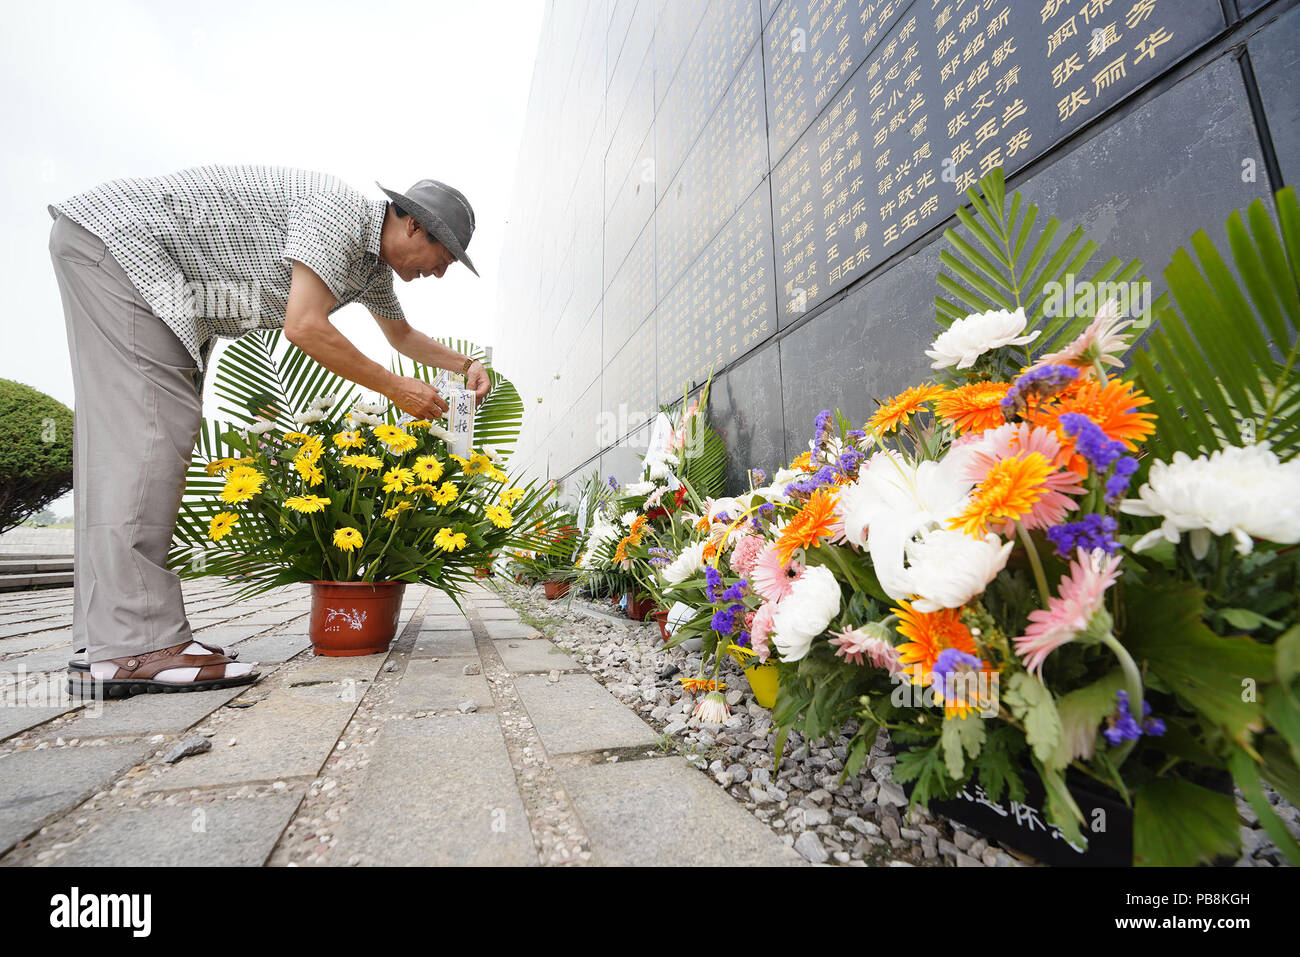 Tangshan. 27th July, 2018. A man arranges a flower basket in front of the memorial wall in Tangshan, north China's Hebei Province, July 27, 2018, one day before the 42nd anniversary of the 1976 Tangshan earthquake. Credit: Dong Jun/Xinhua/Alamy Live News Stock Photo